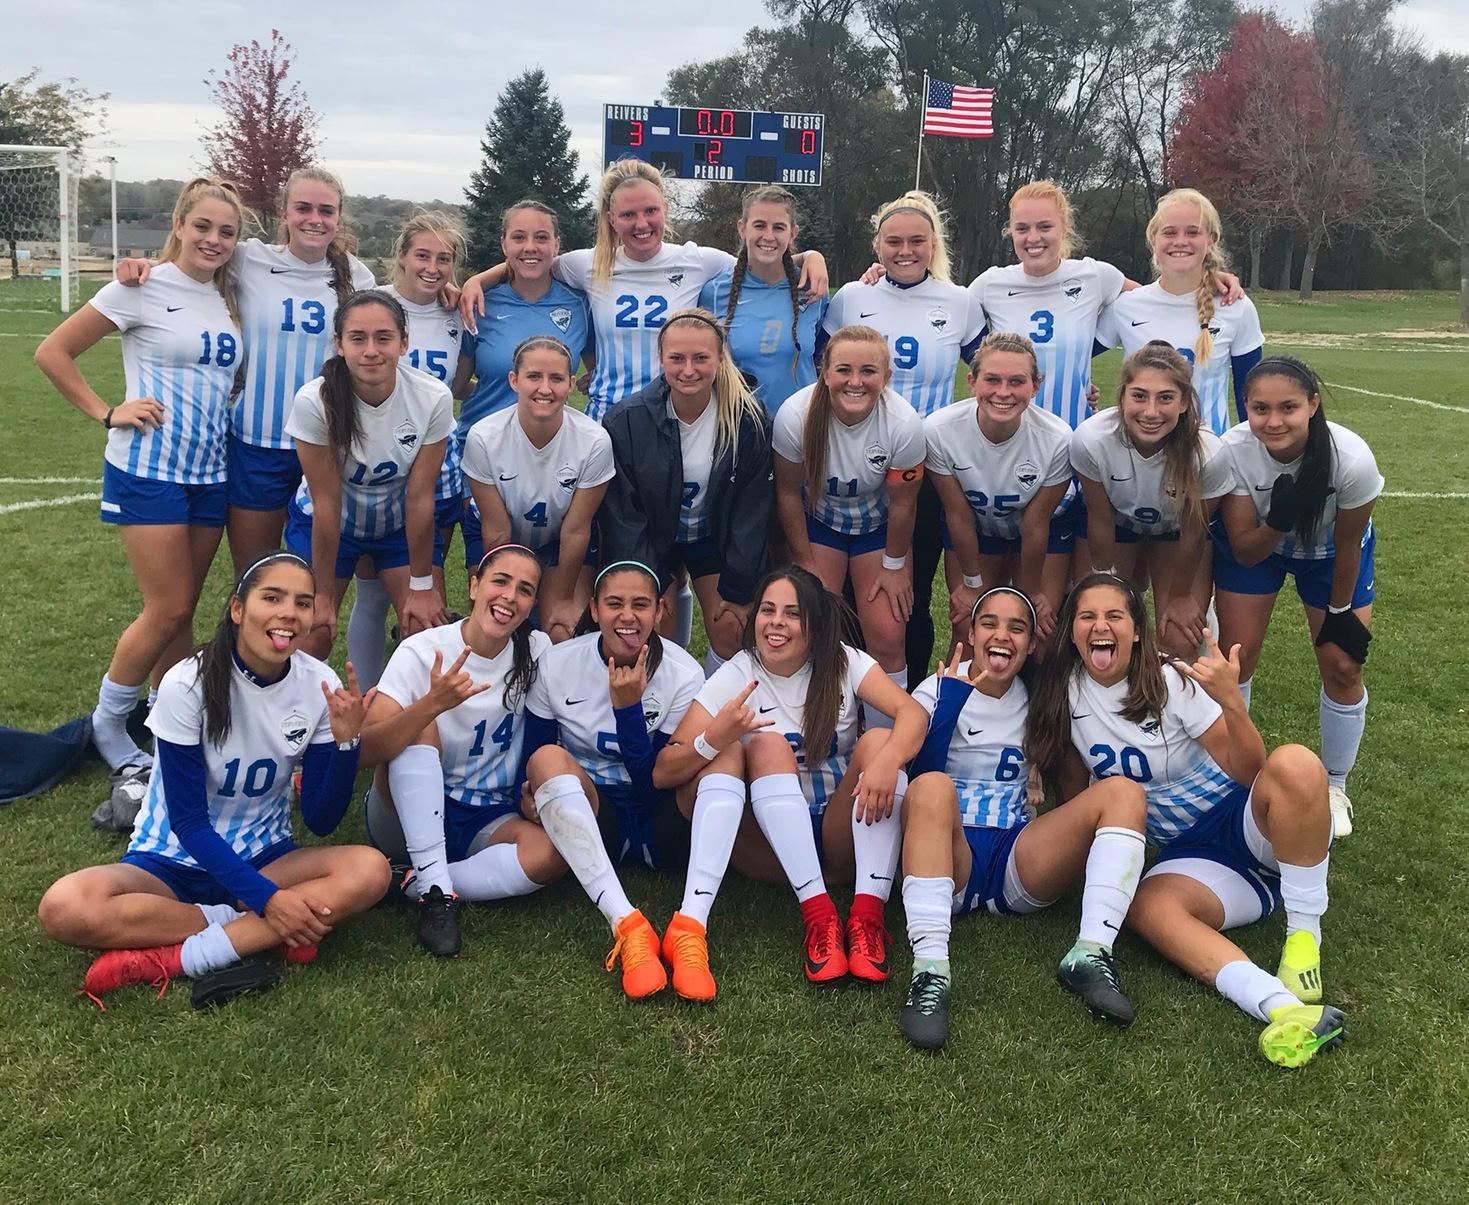 Reiver Women's Soccer advances to Region XI Championship following 3-0 win over Indian Hills in Semi-final match-up